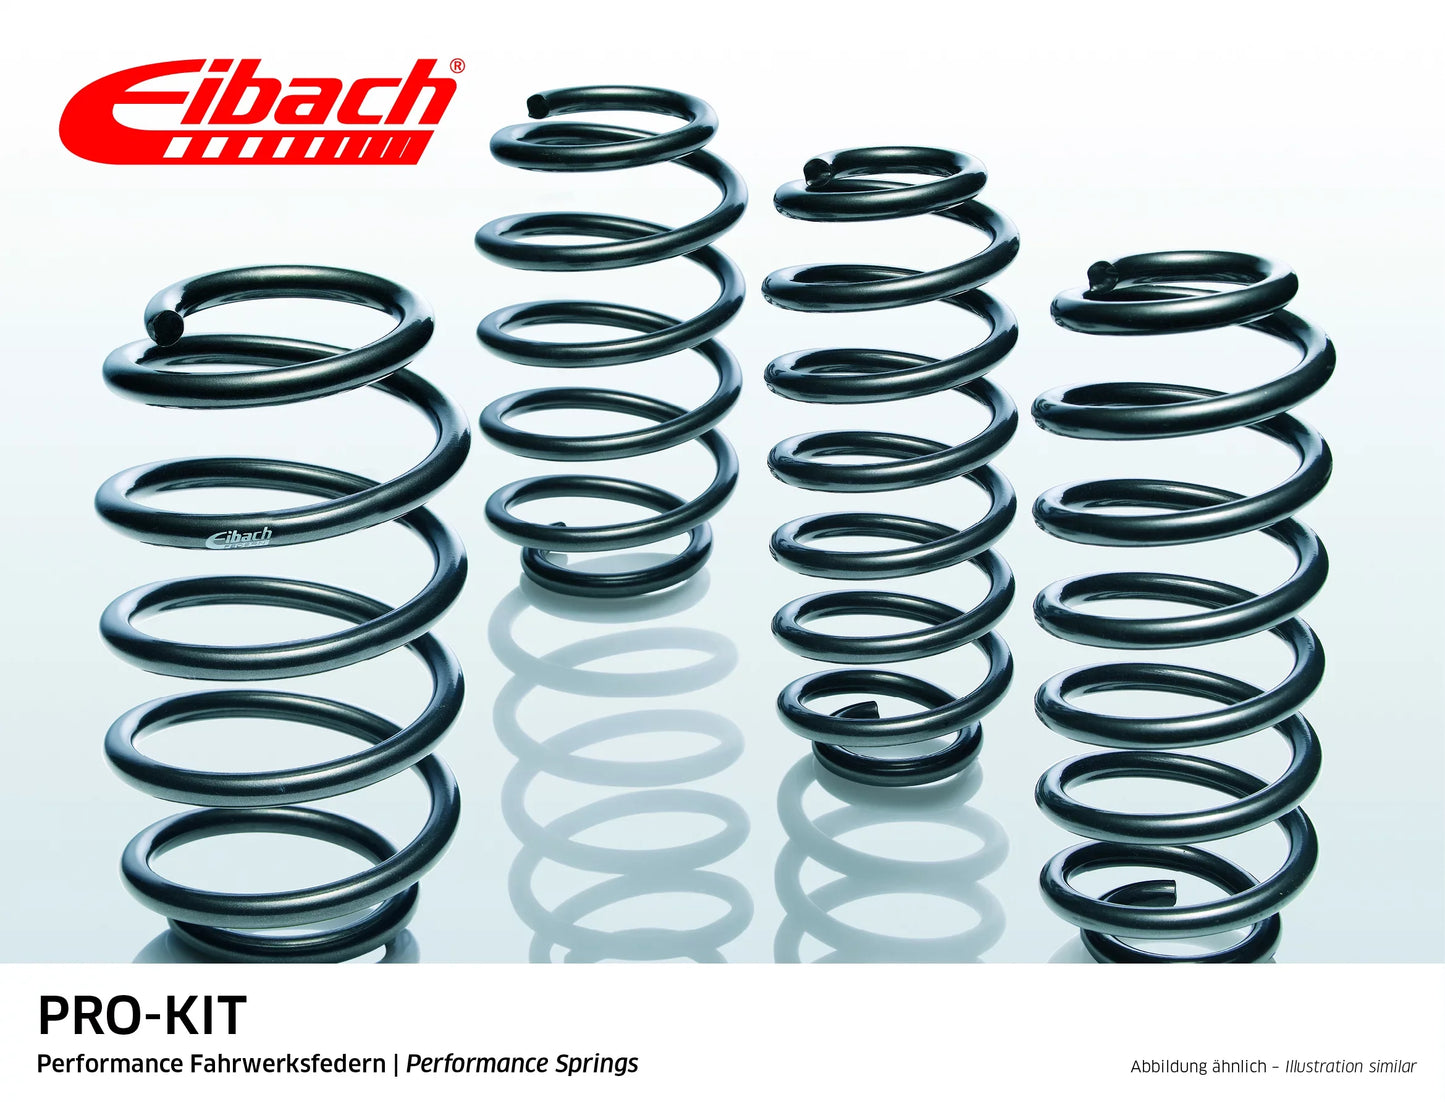 Eibach Pro-Kit Lowering Springs (E10-20-017-03-22) at £364.60